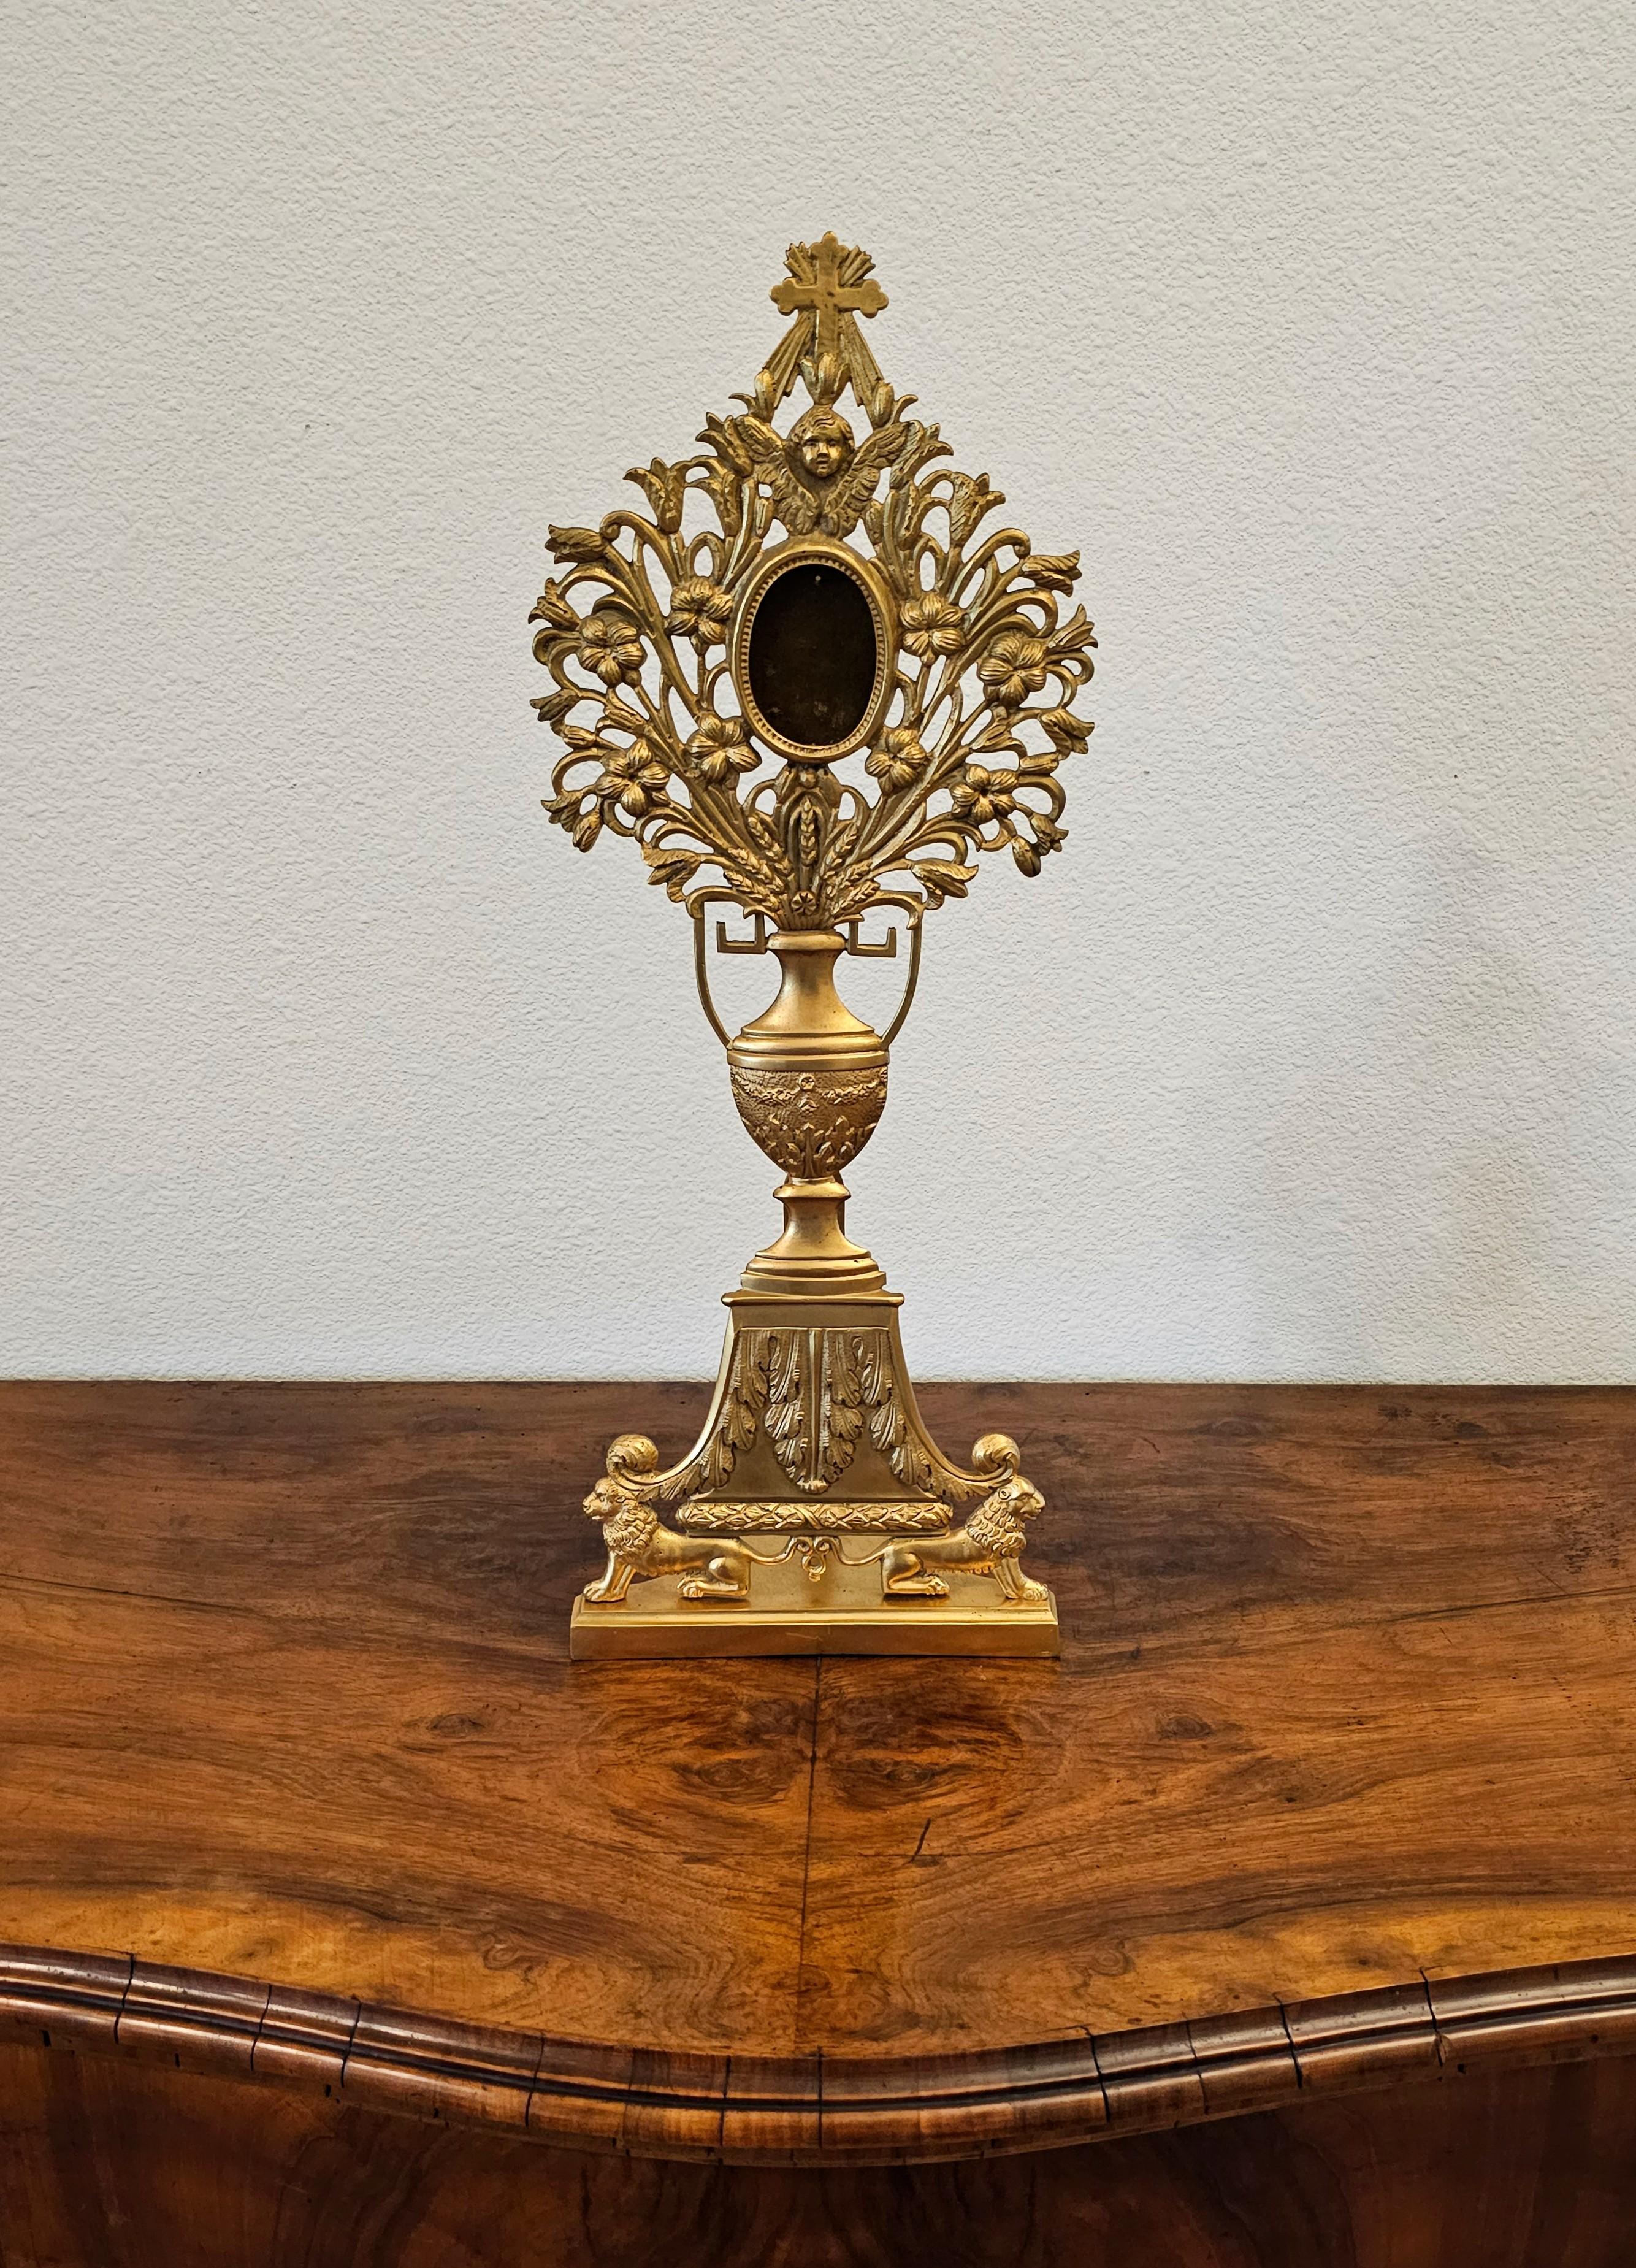 A scarce fine quality neoclassical Empire style vasiform gilt bronze ormolu church religious relic altar monstrance reliquary.

Exquisitely hand-crafted in Continental Europe in the second half of the 19th century, most likely French Napoleon III